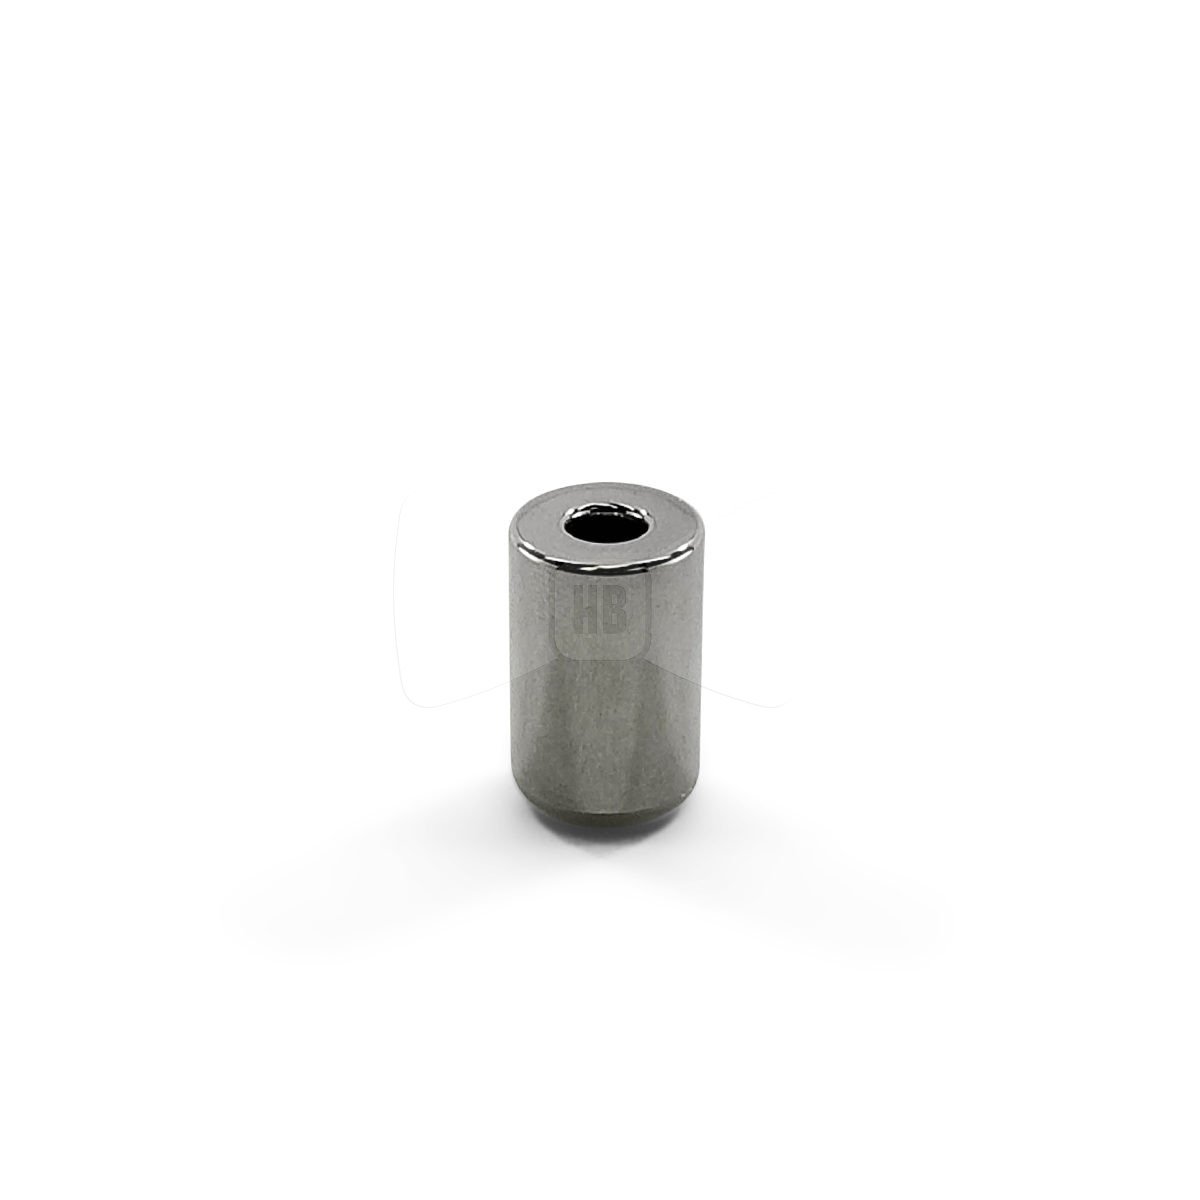 CCell Threaded Mouthpiece Silver Barrel